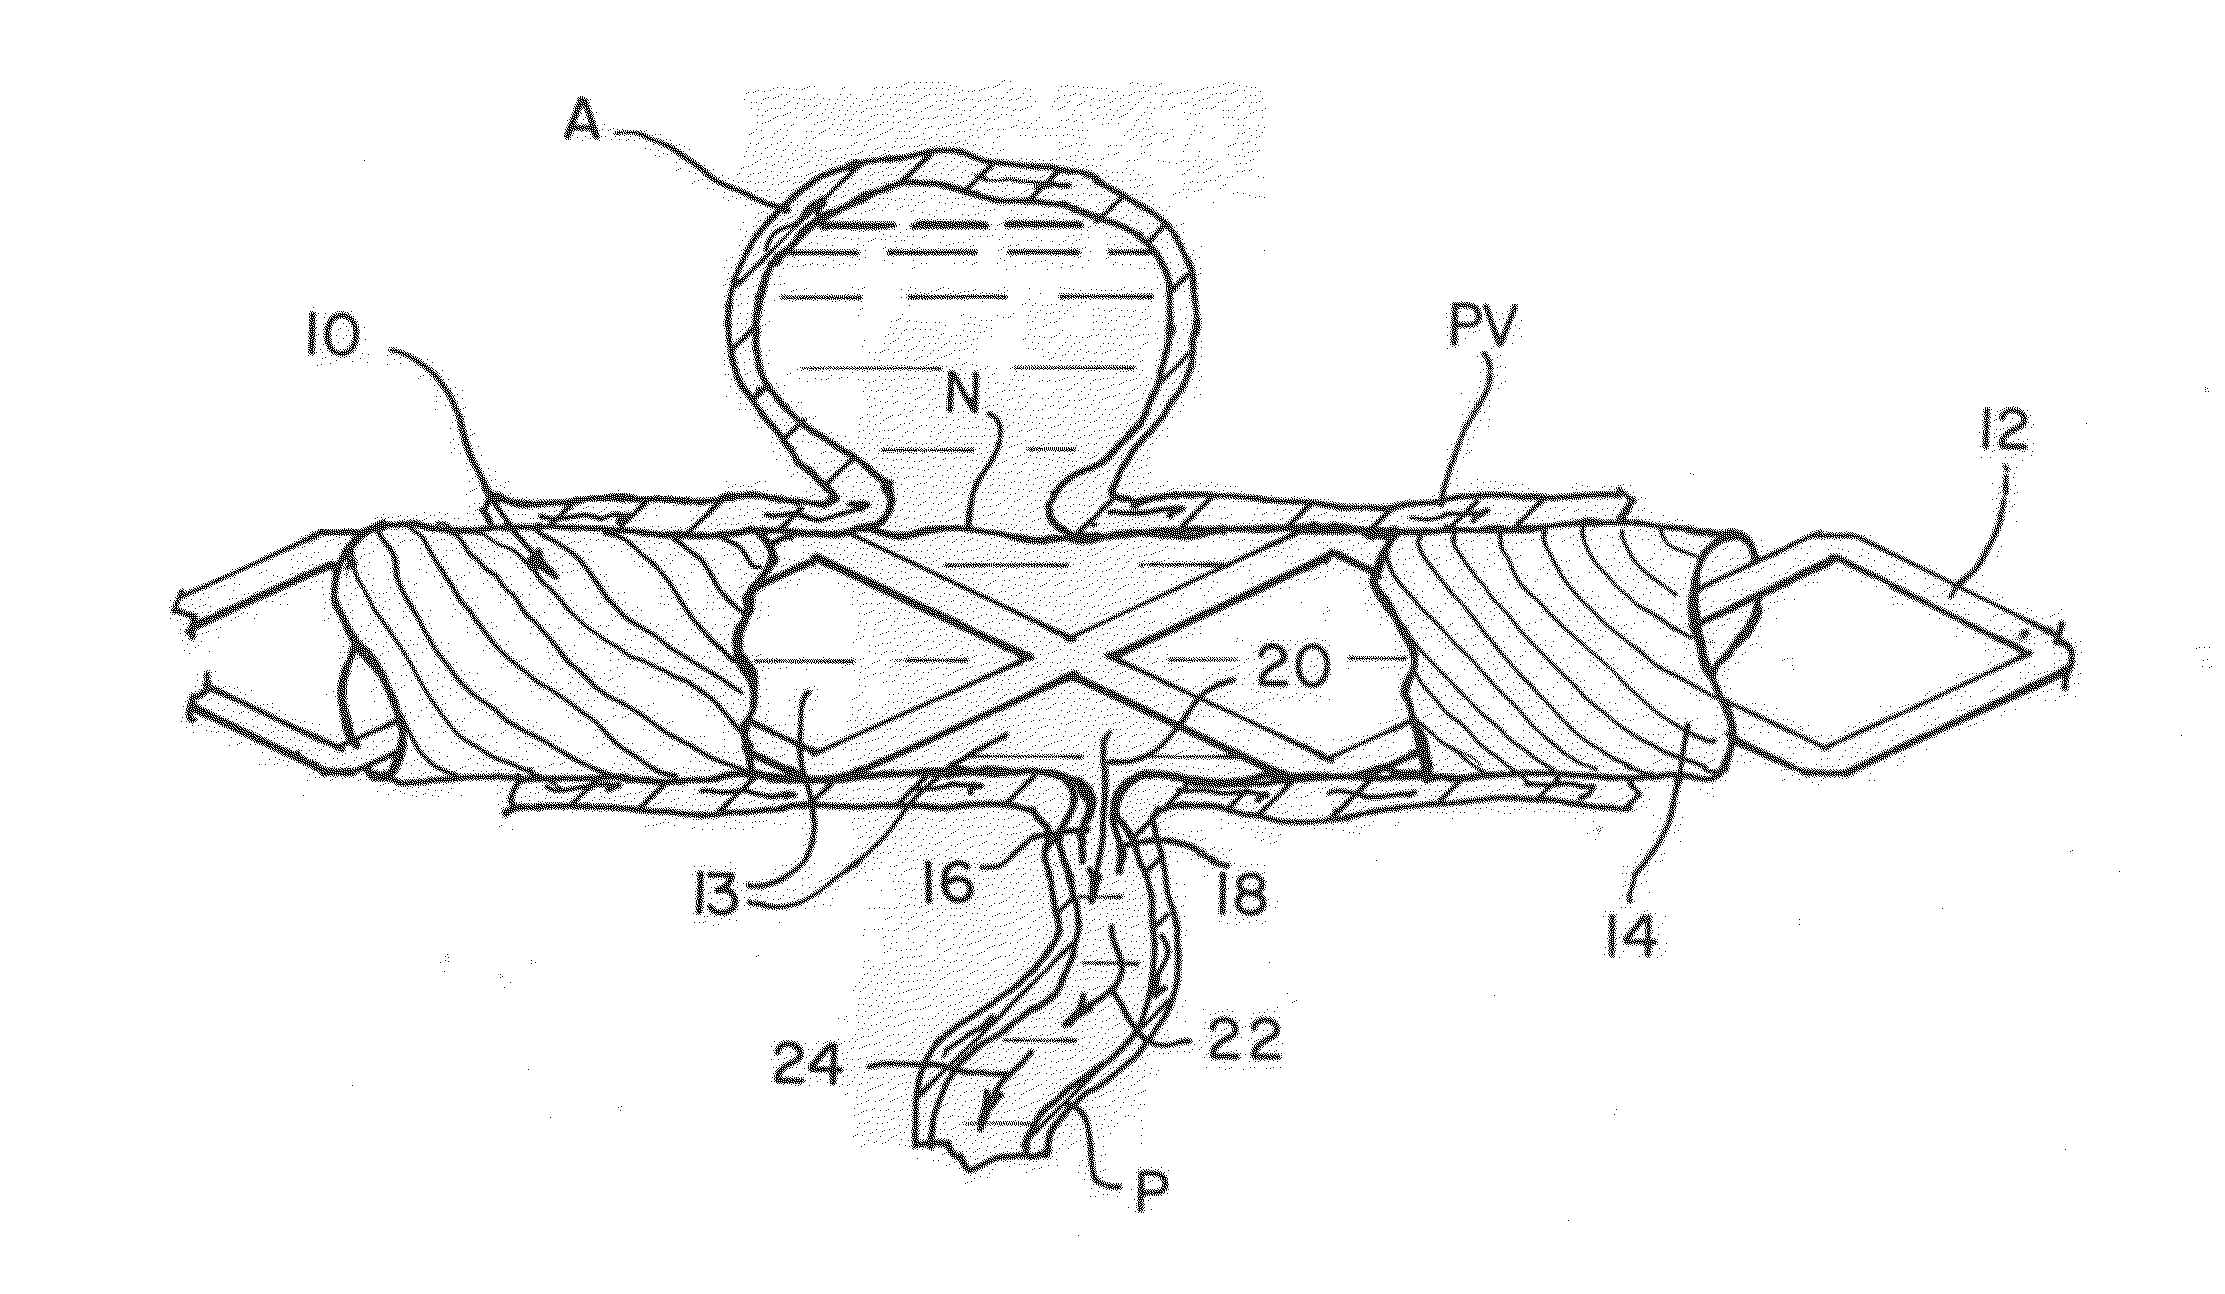 Method of fabricating modifiable occlusion device